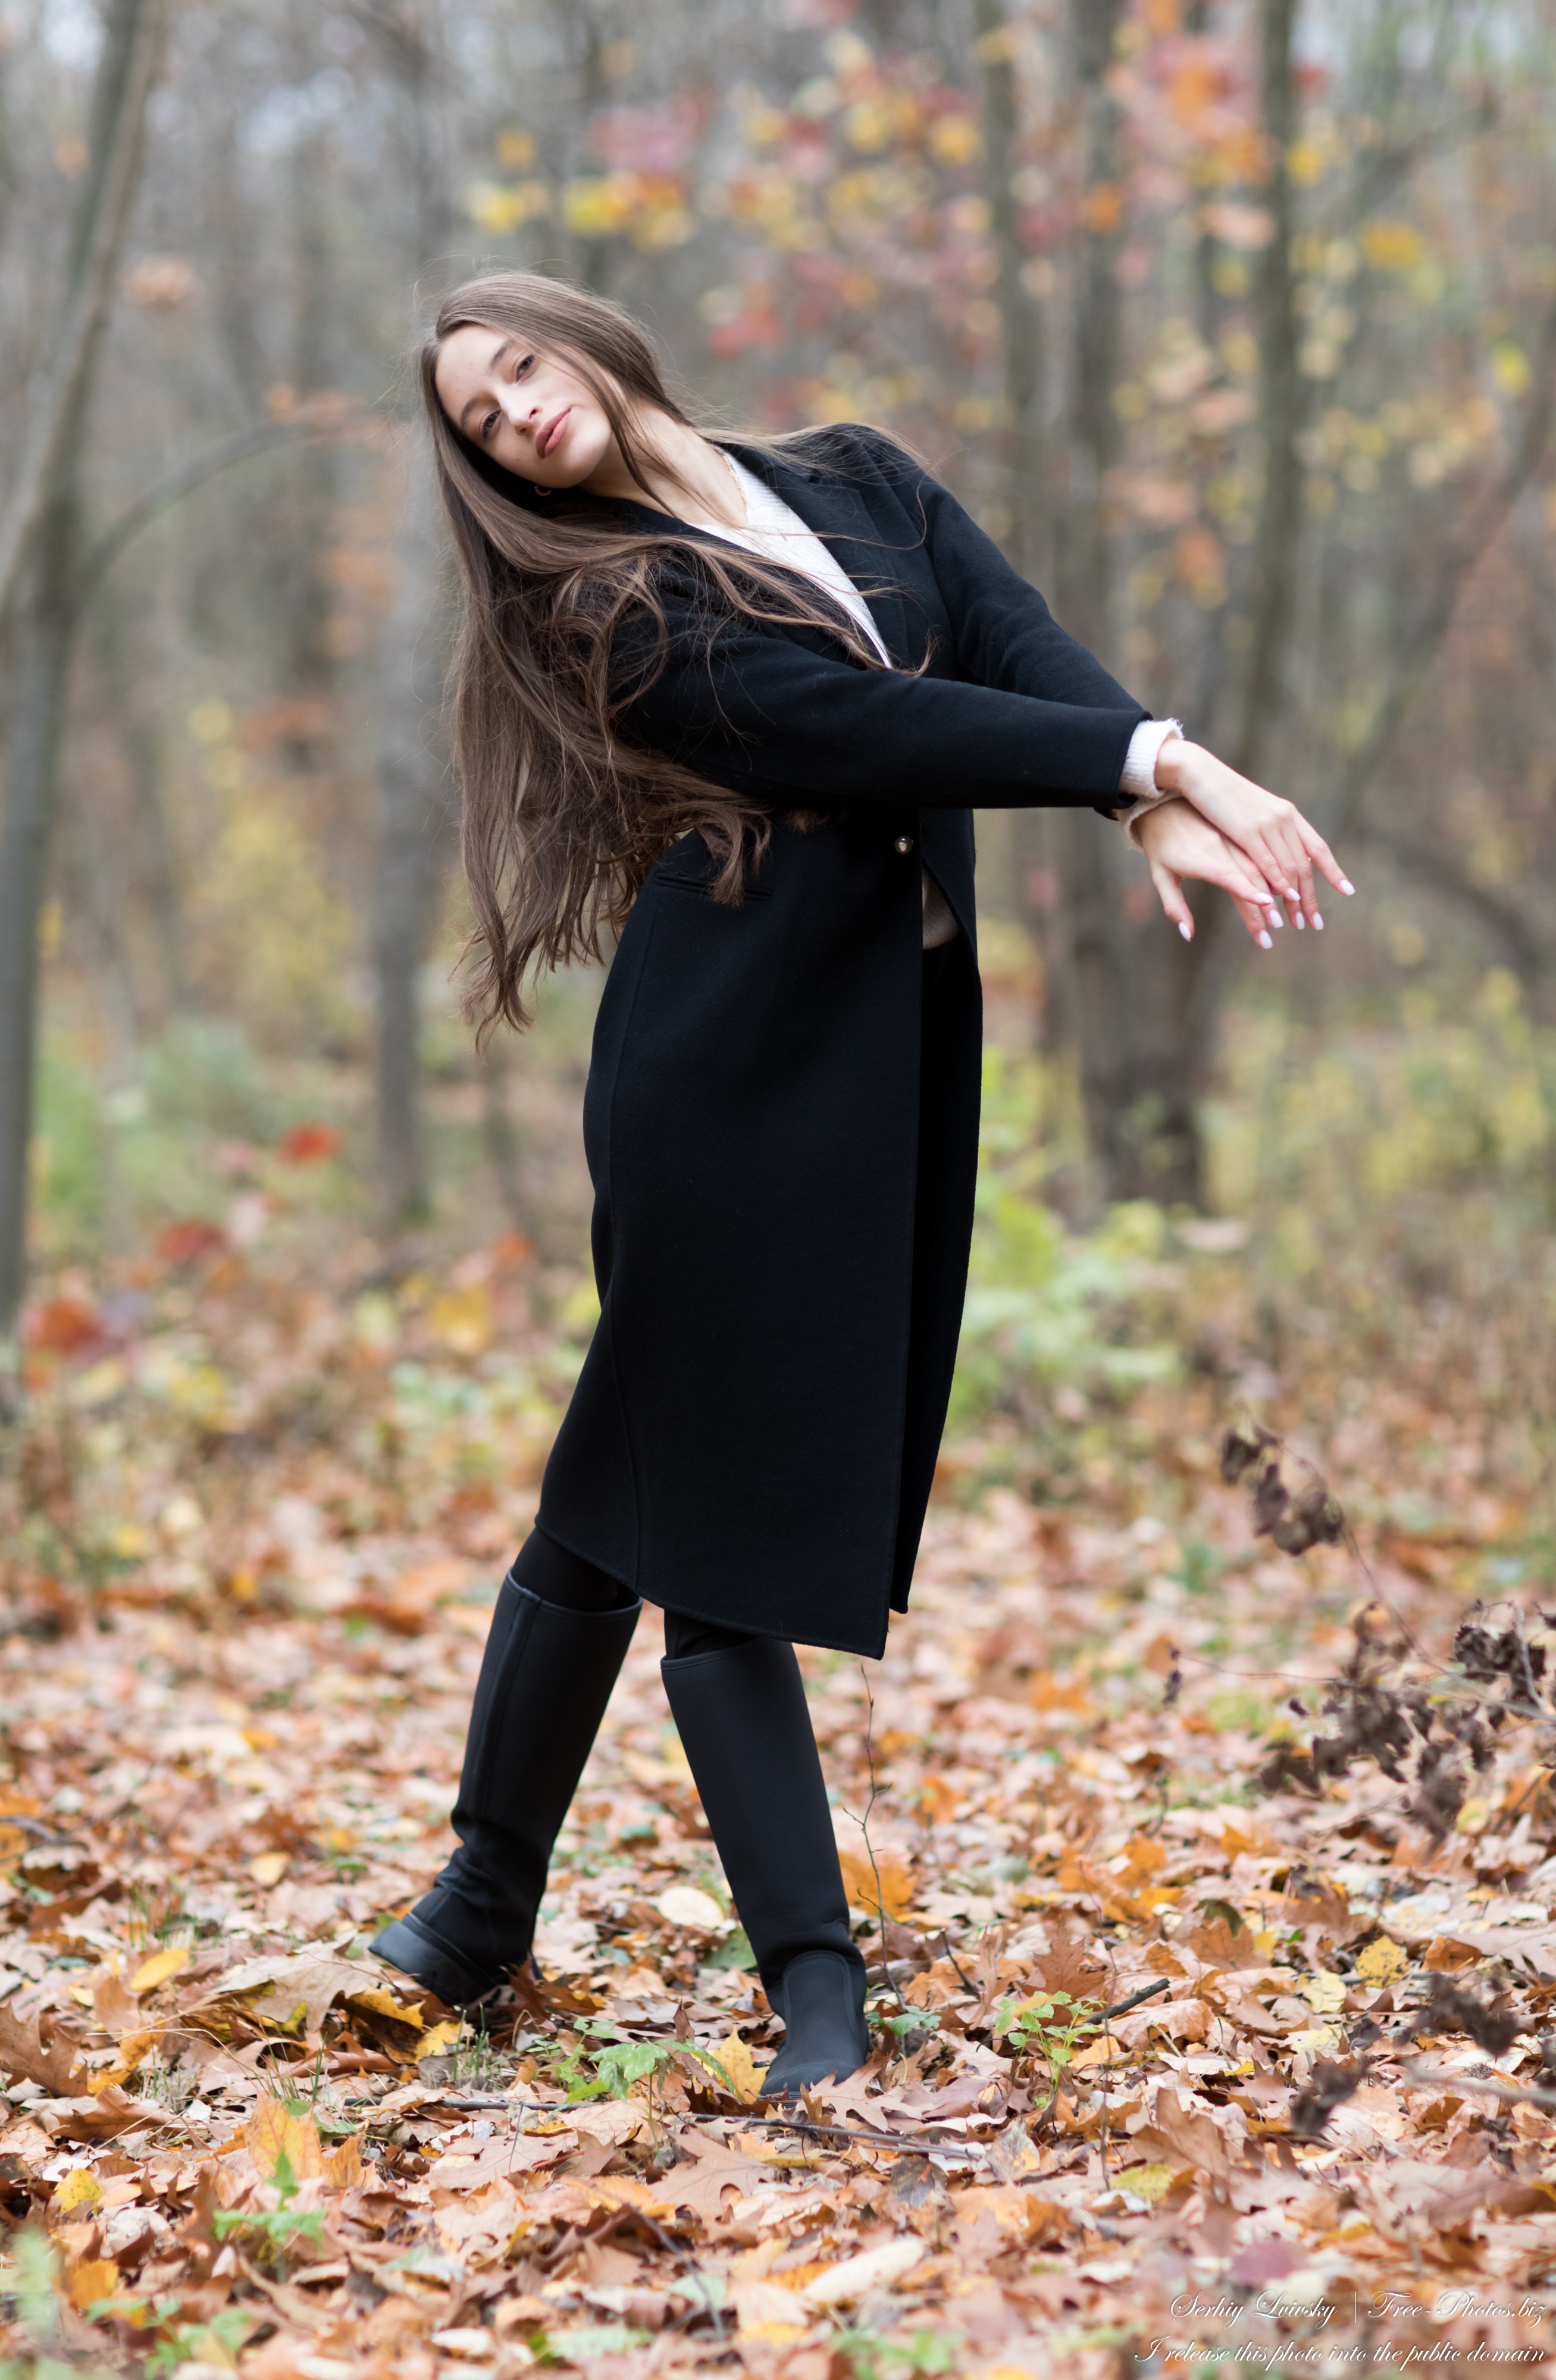 Anna - a 17-year-old ballerina photographed in November 2021 by Serhiy Lvivsky, picture 27